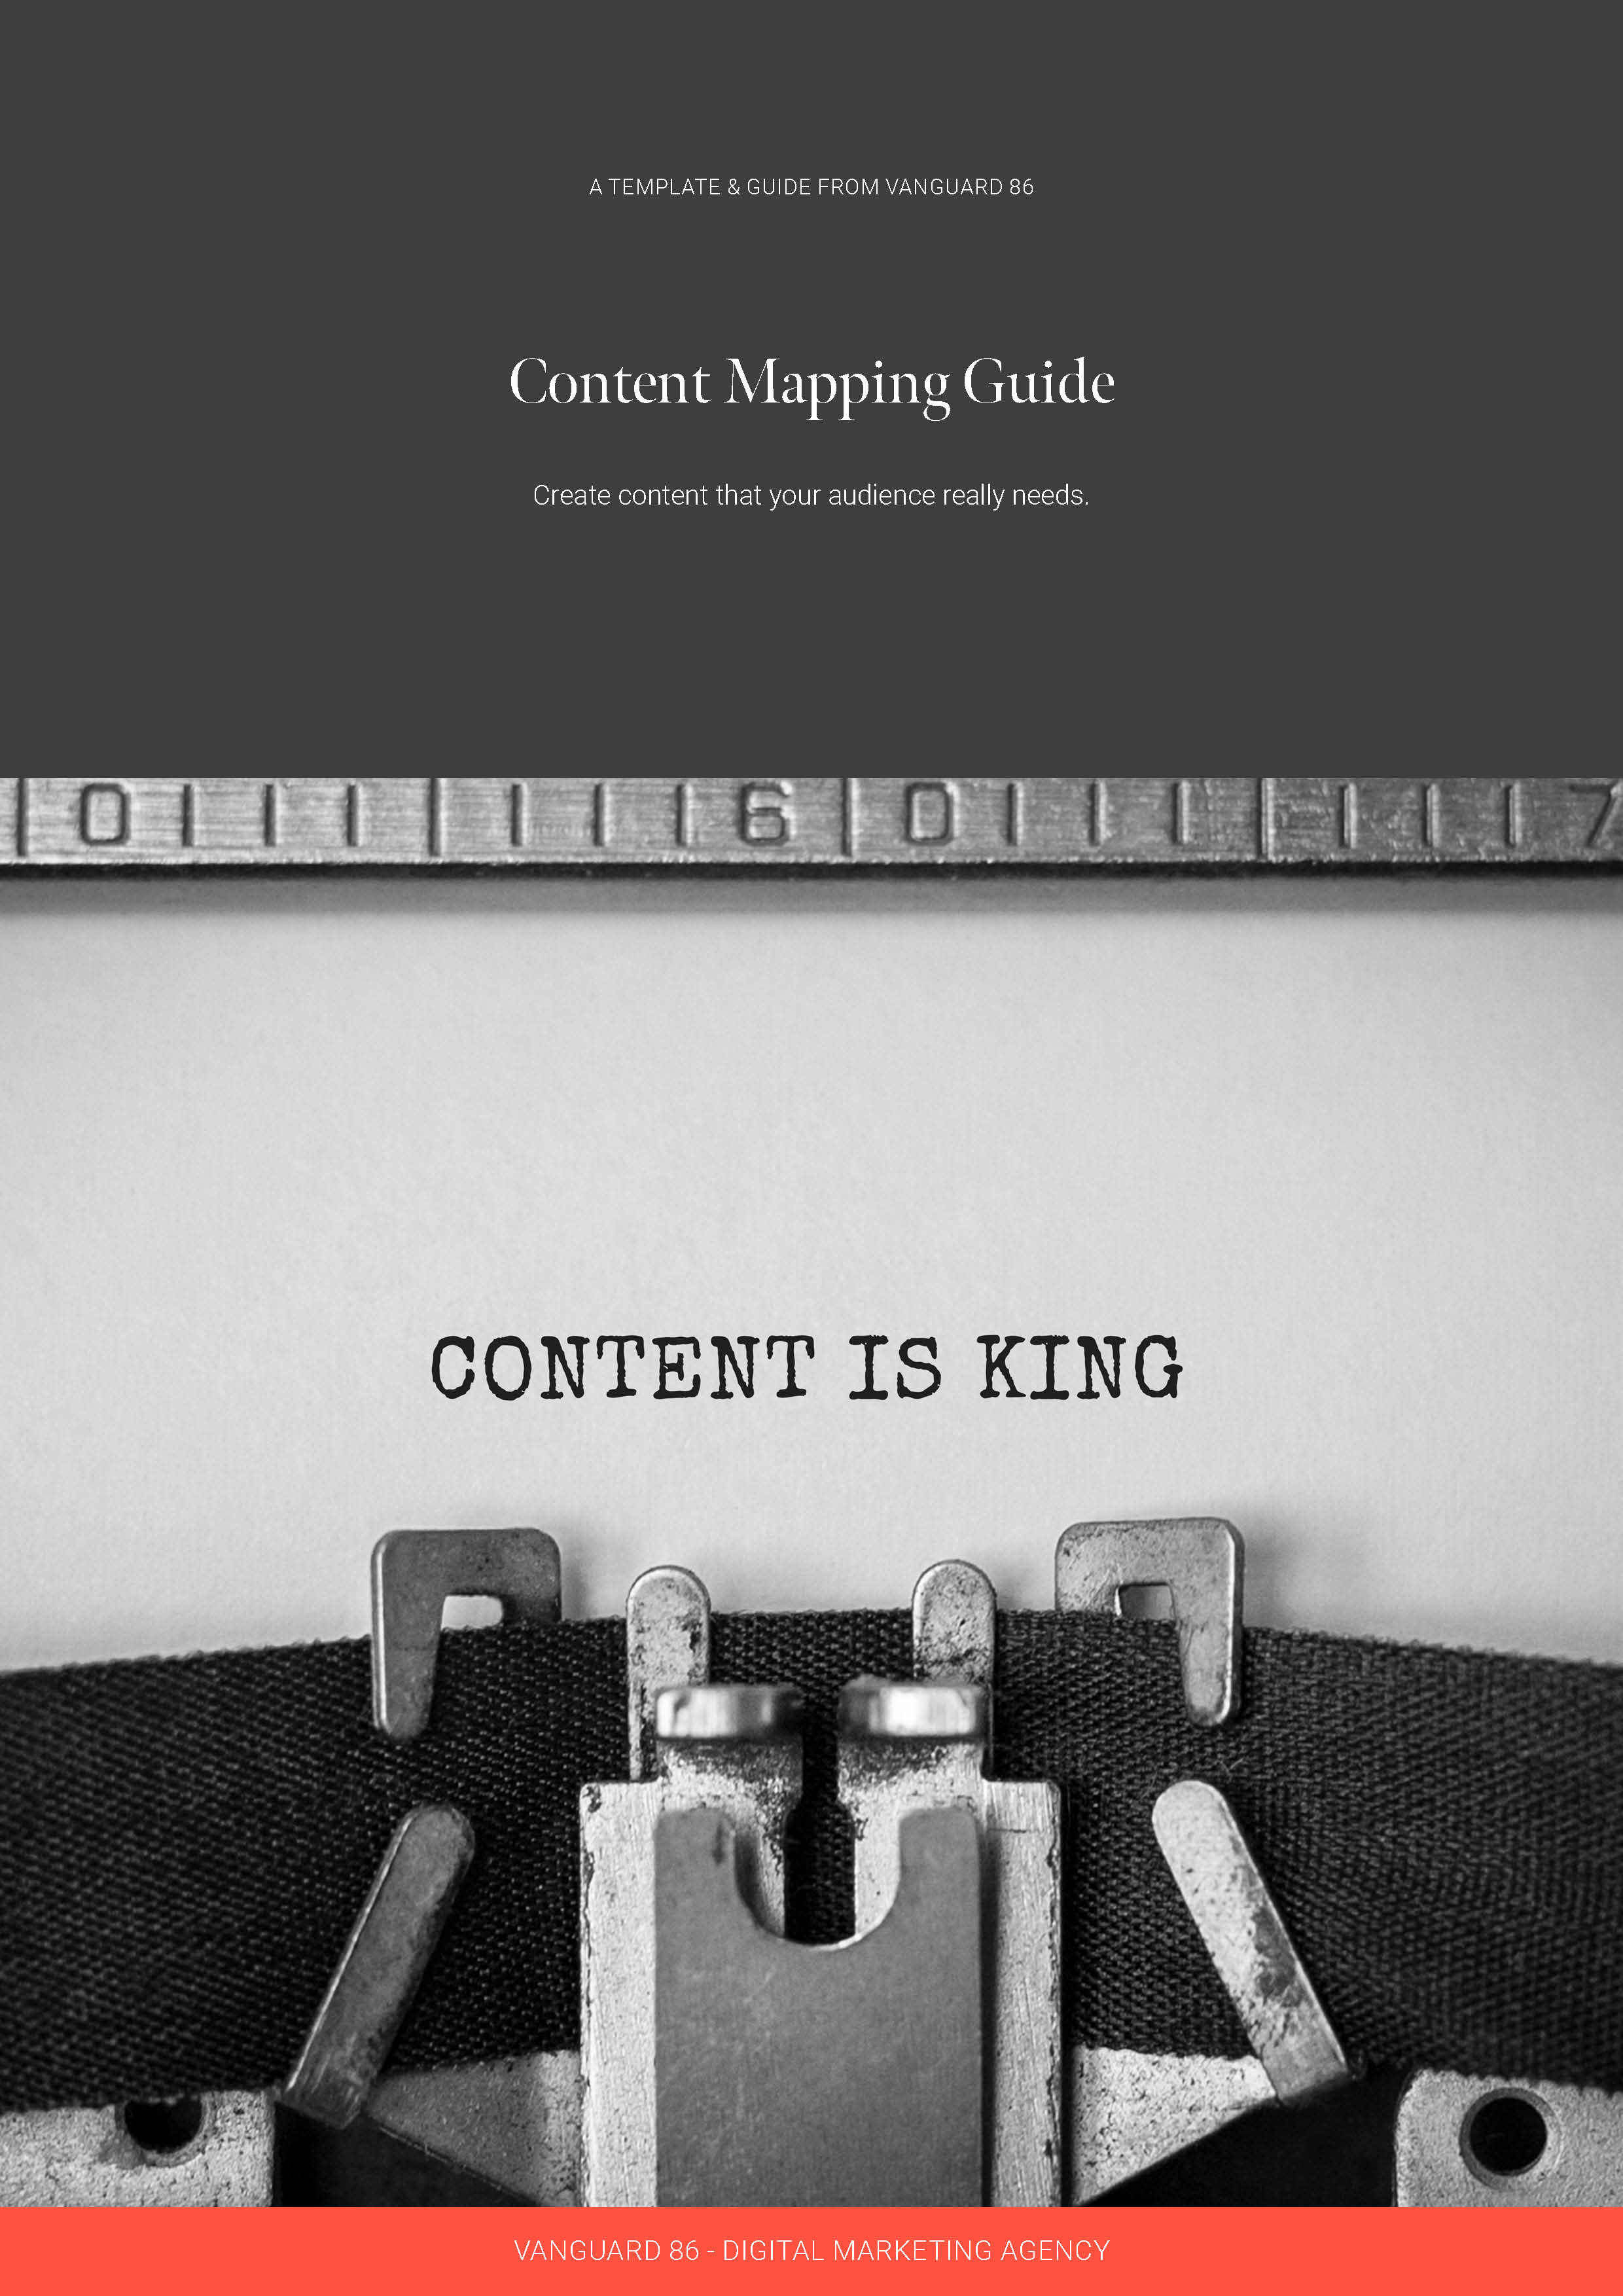 Content mapping